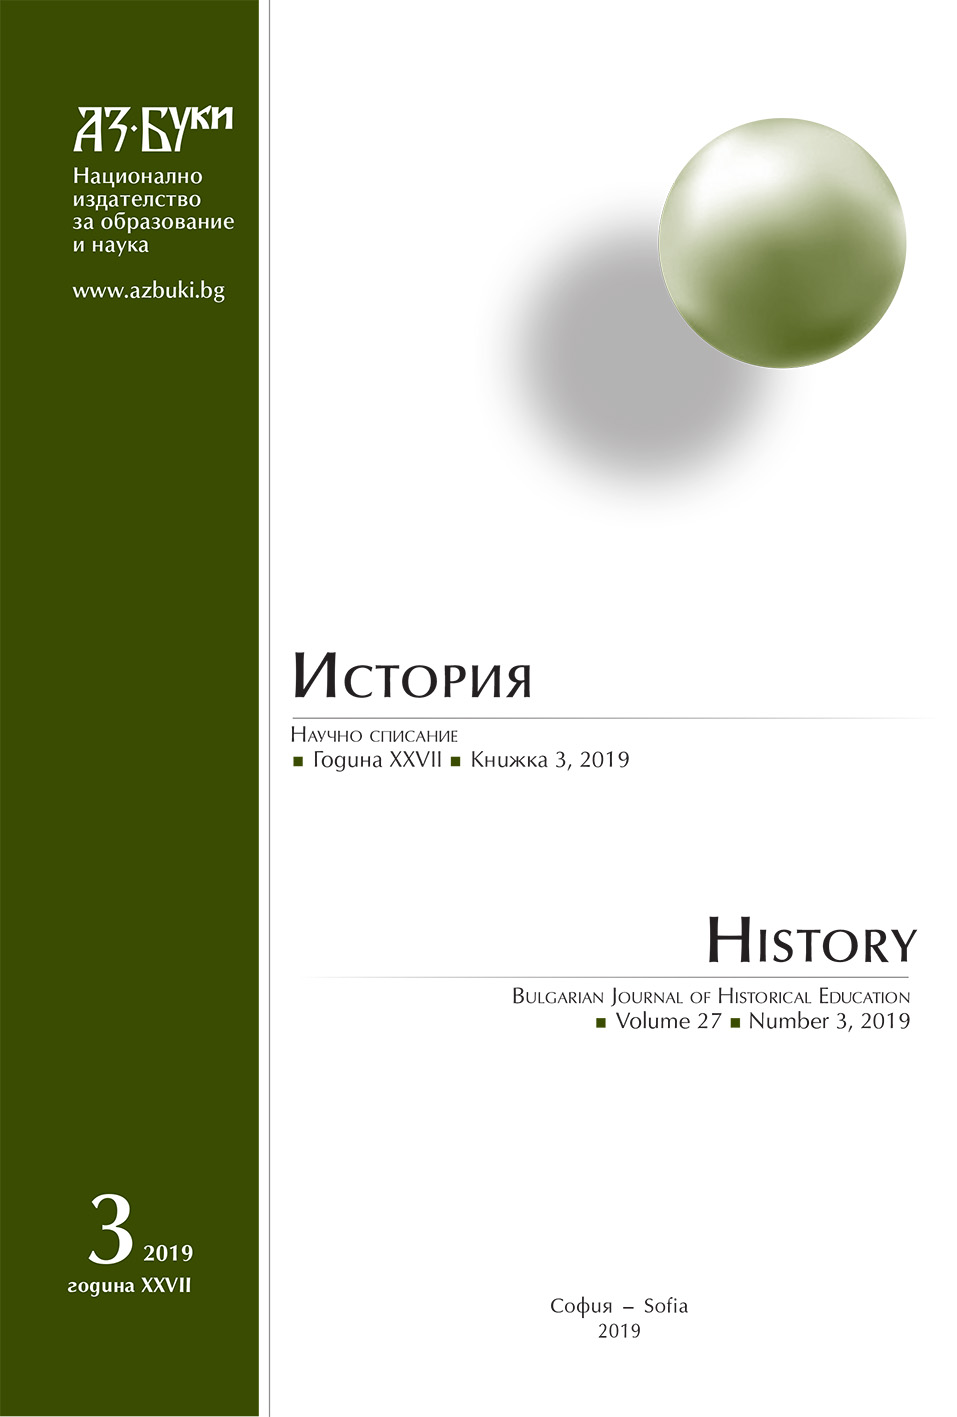 Tolstoyism and Public Organizations in Bulgaria during the First Half of the ХХ Century Cover Image